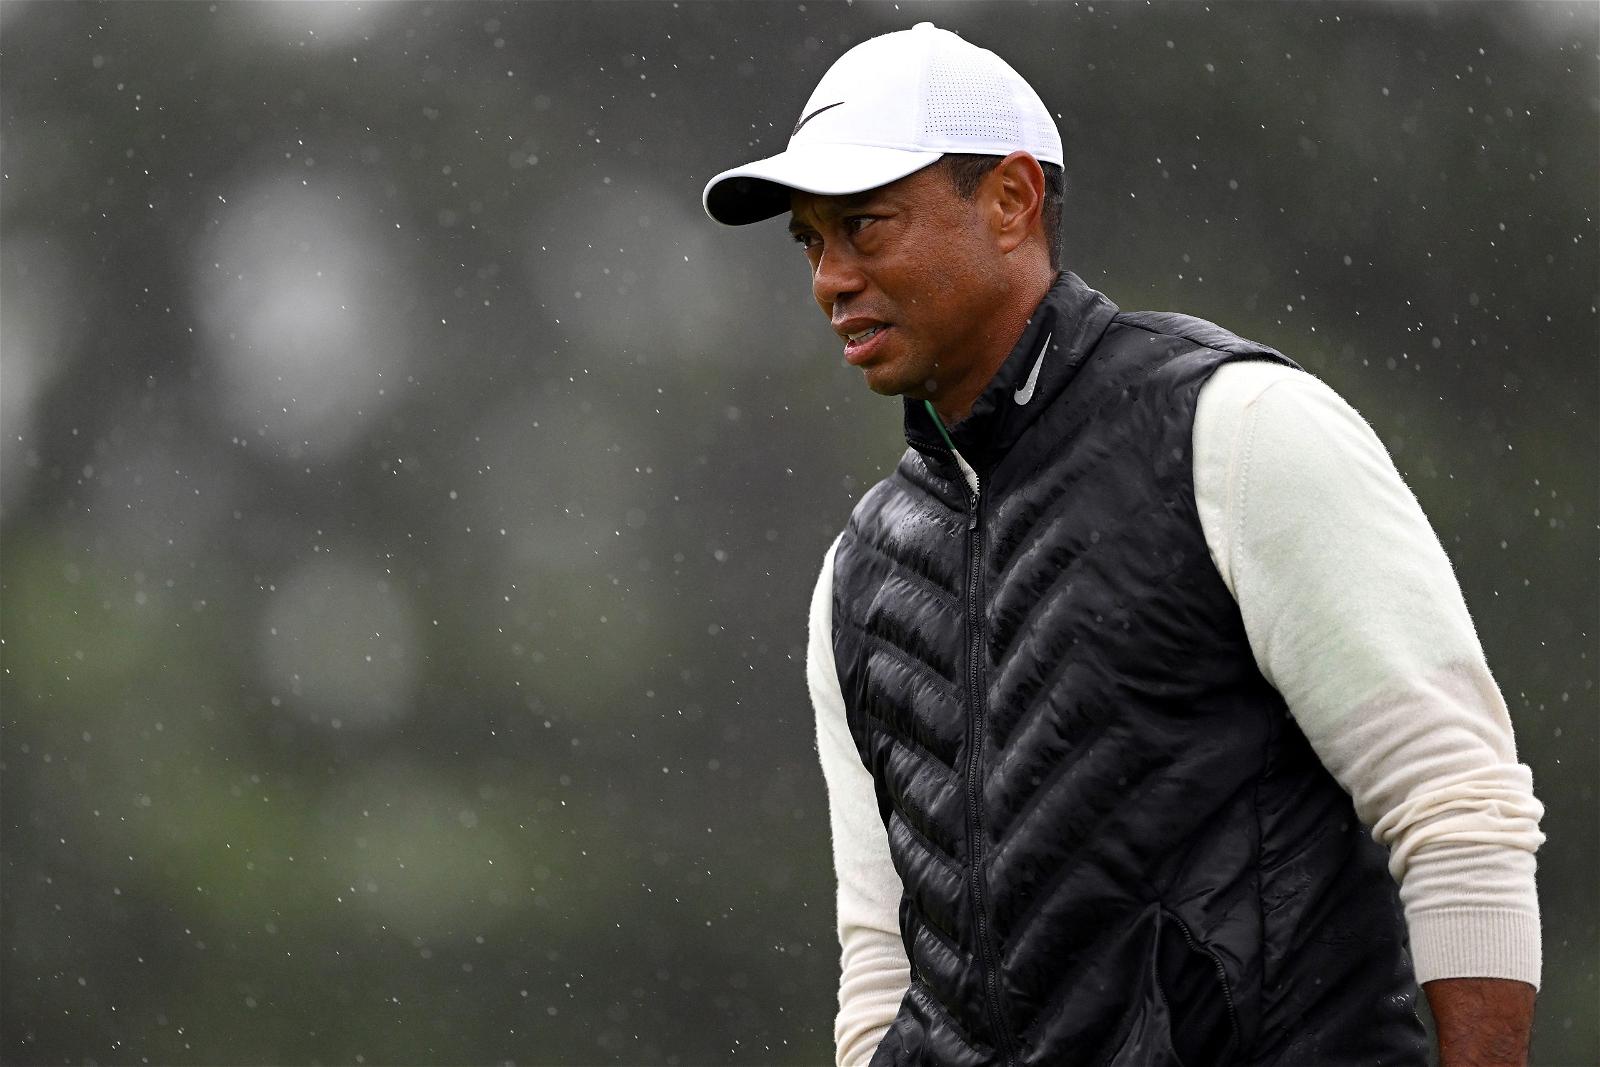 Tiger Woods withdraws from Masters due to injury Vanguard News